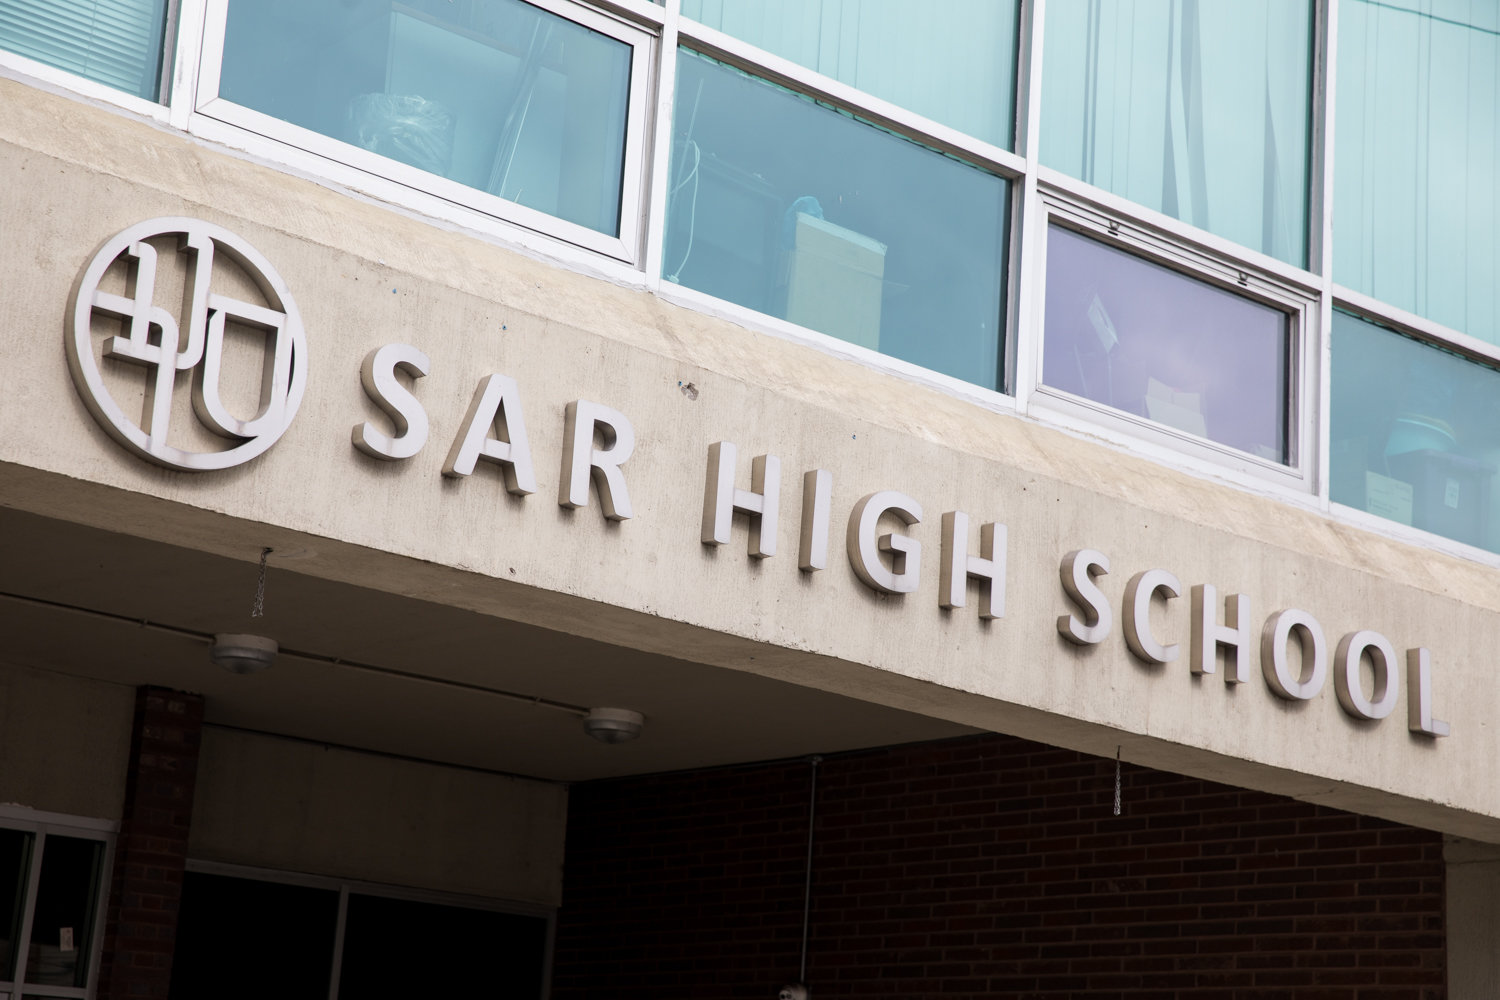 The father of an SAR High School student who was one of the first in New York to test positive for the coronavirus that causes COVID-19, was released from the hospital on Sunday, according to Gov. Andrew Cuomo.